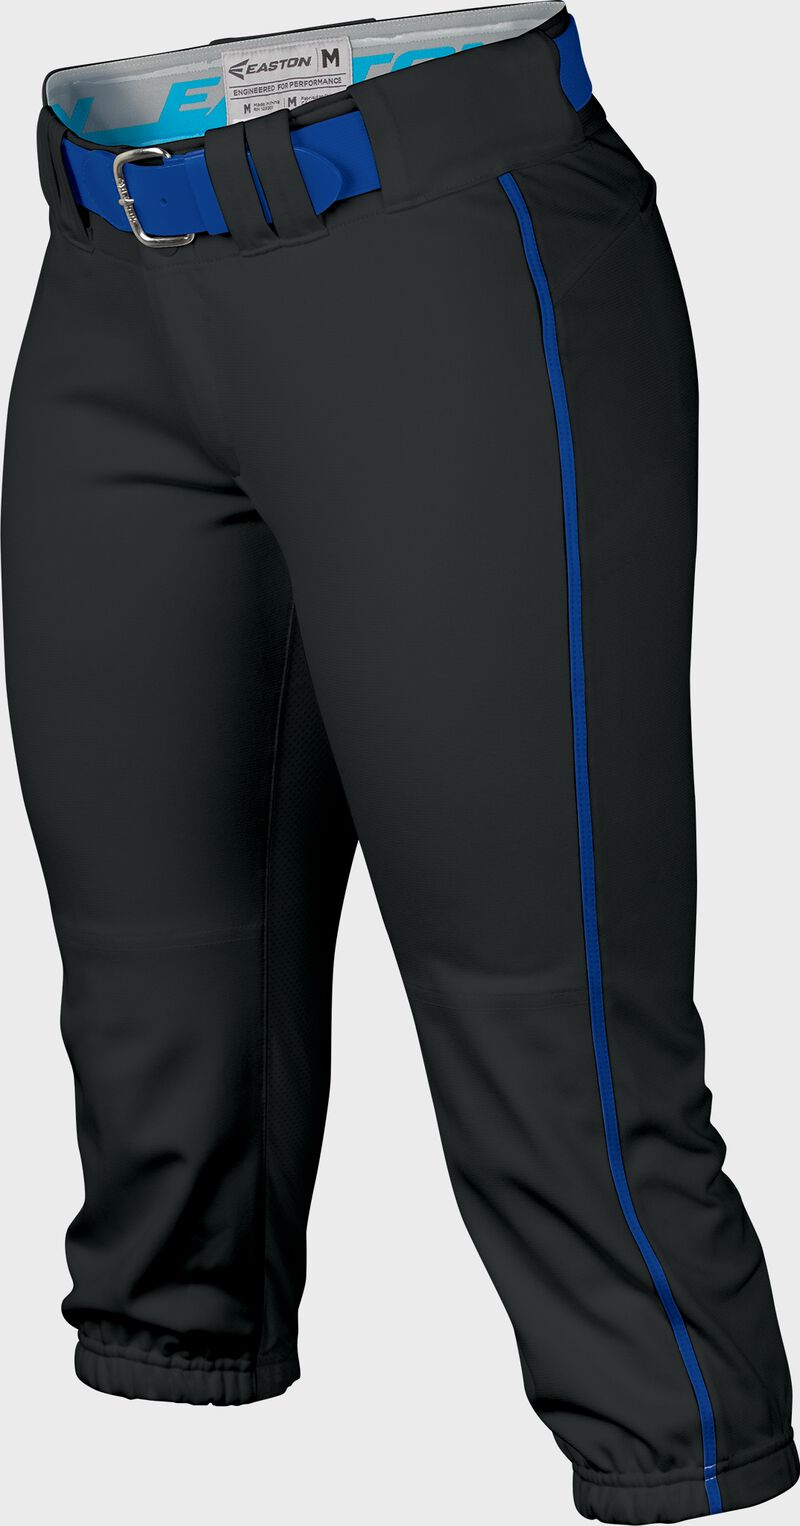 Easton Prowess Softball Pant Women's Piped BLACK/ROYAL  L